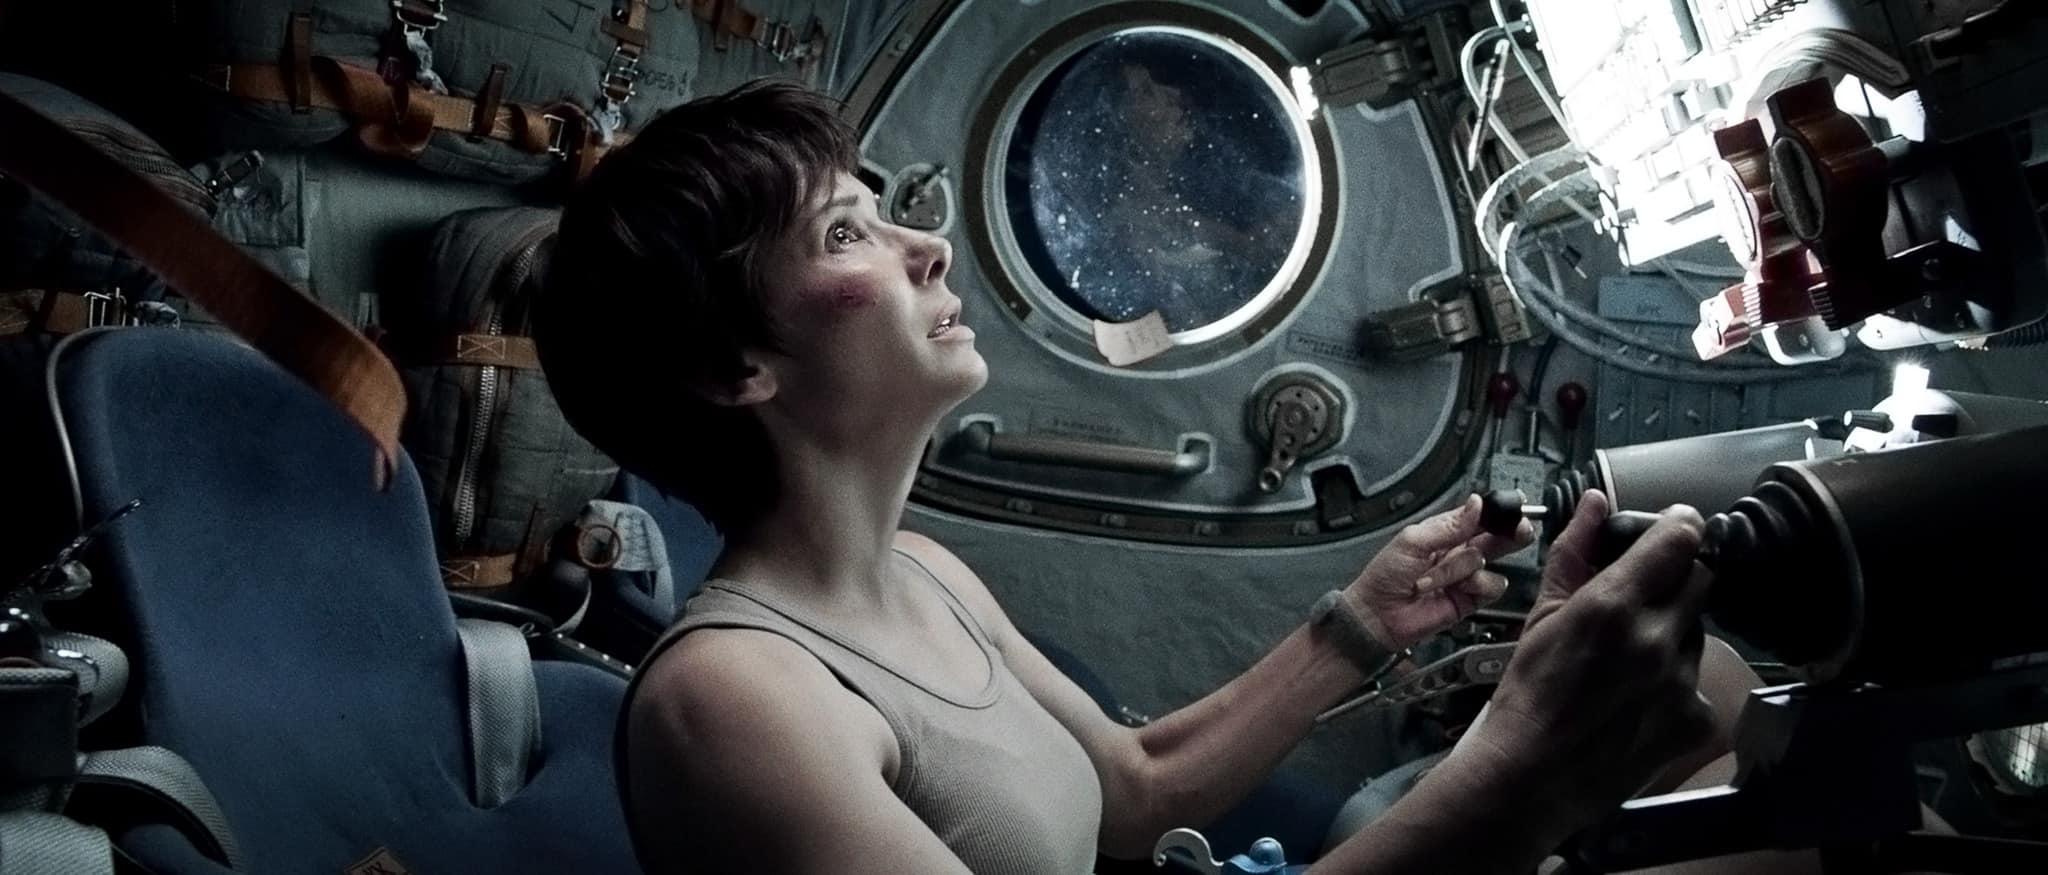 A short-haired woman operates a spaceship in this image from Warner Bros.